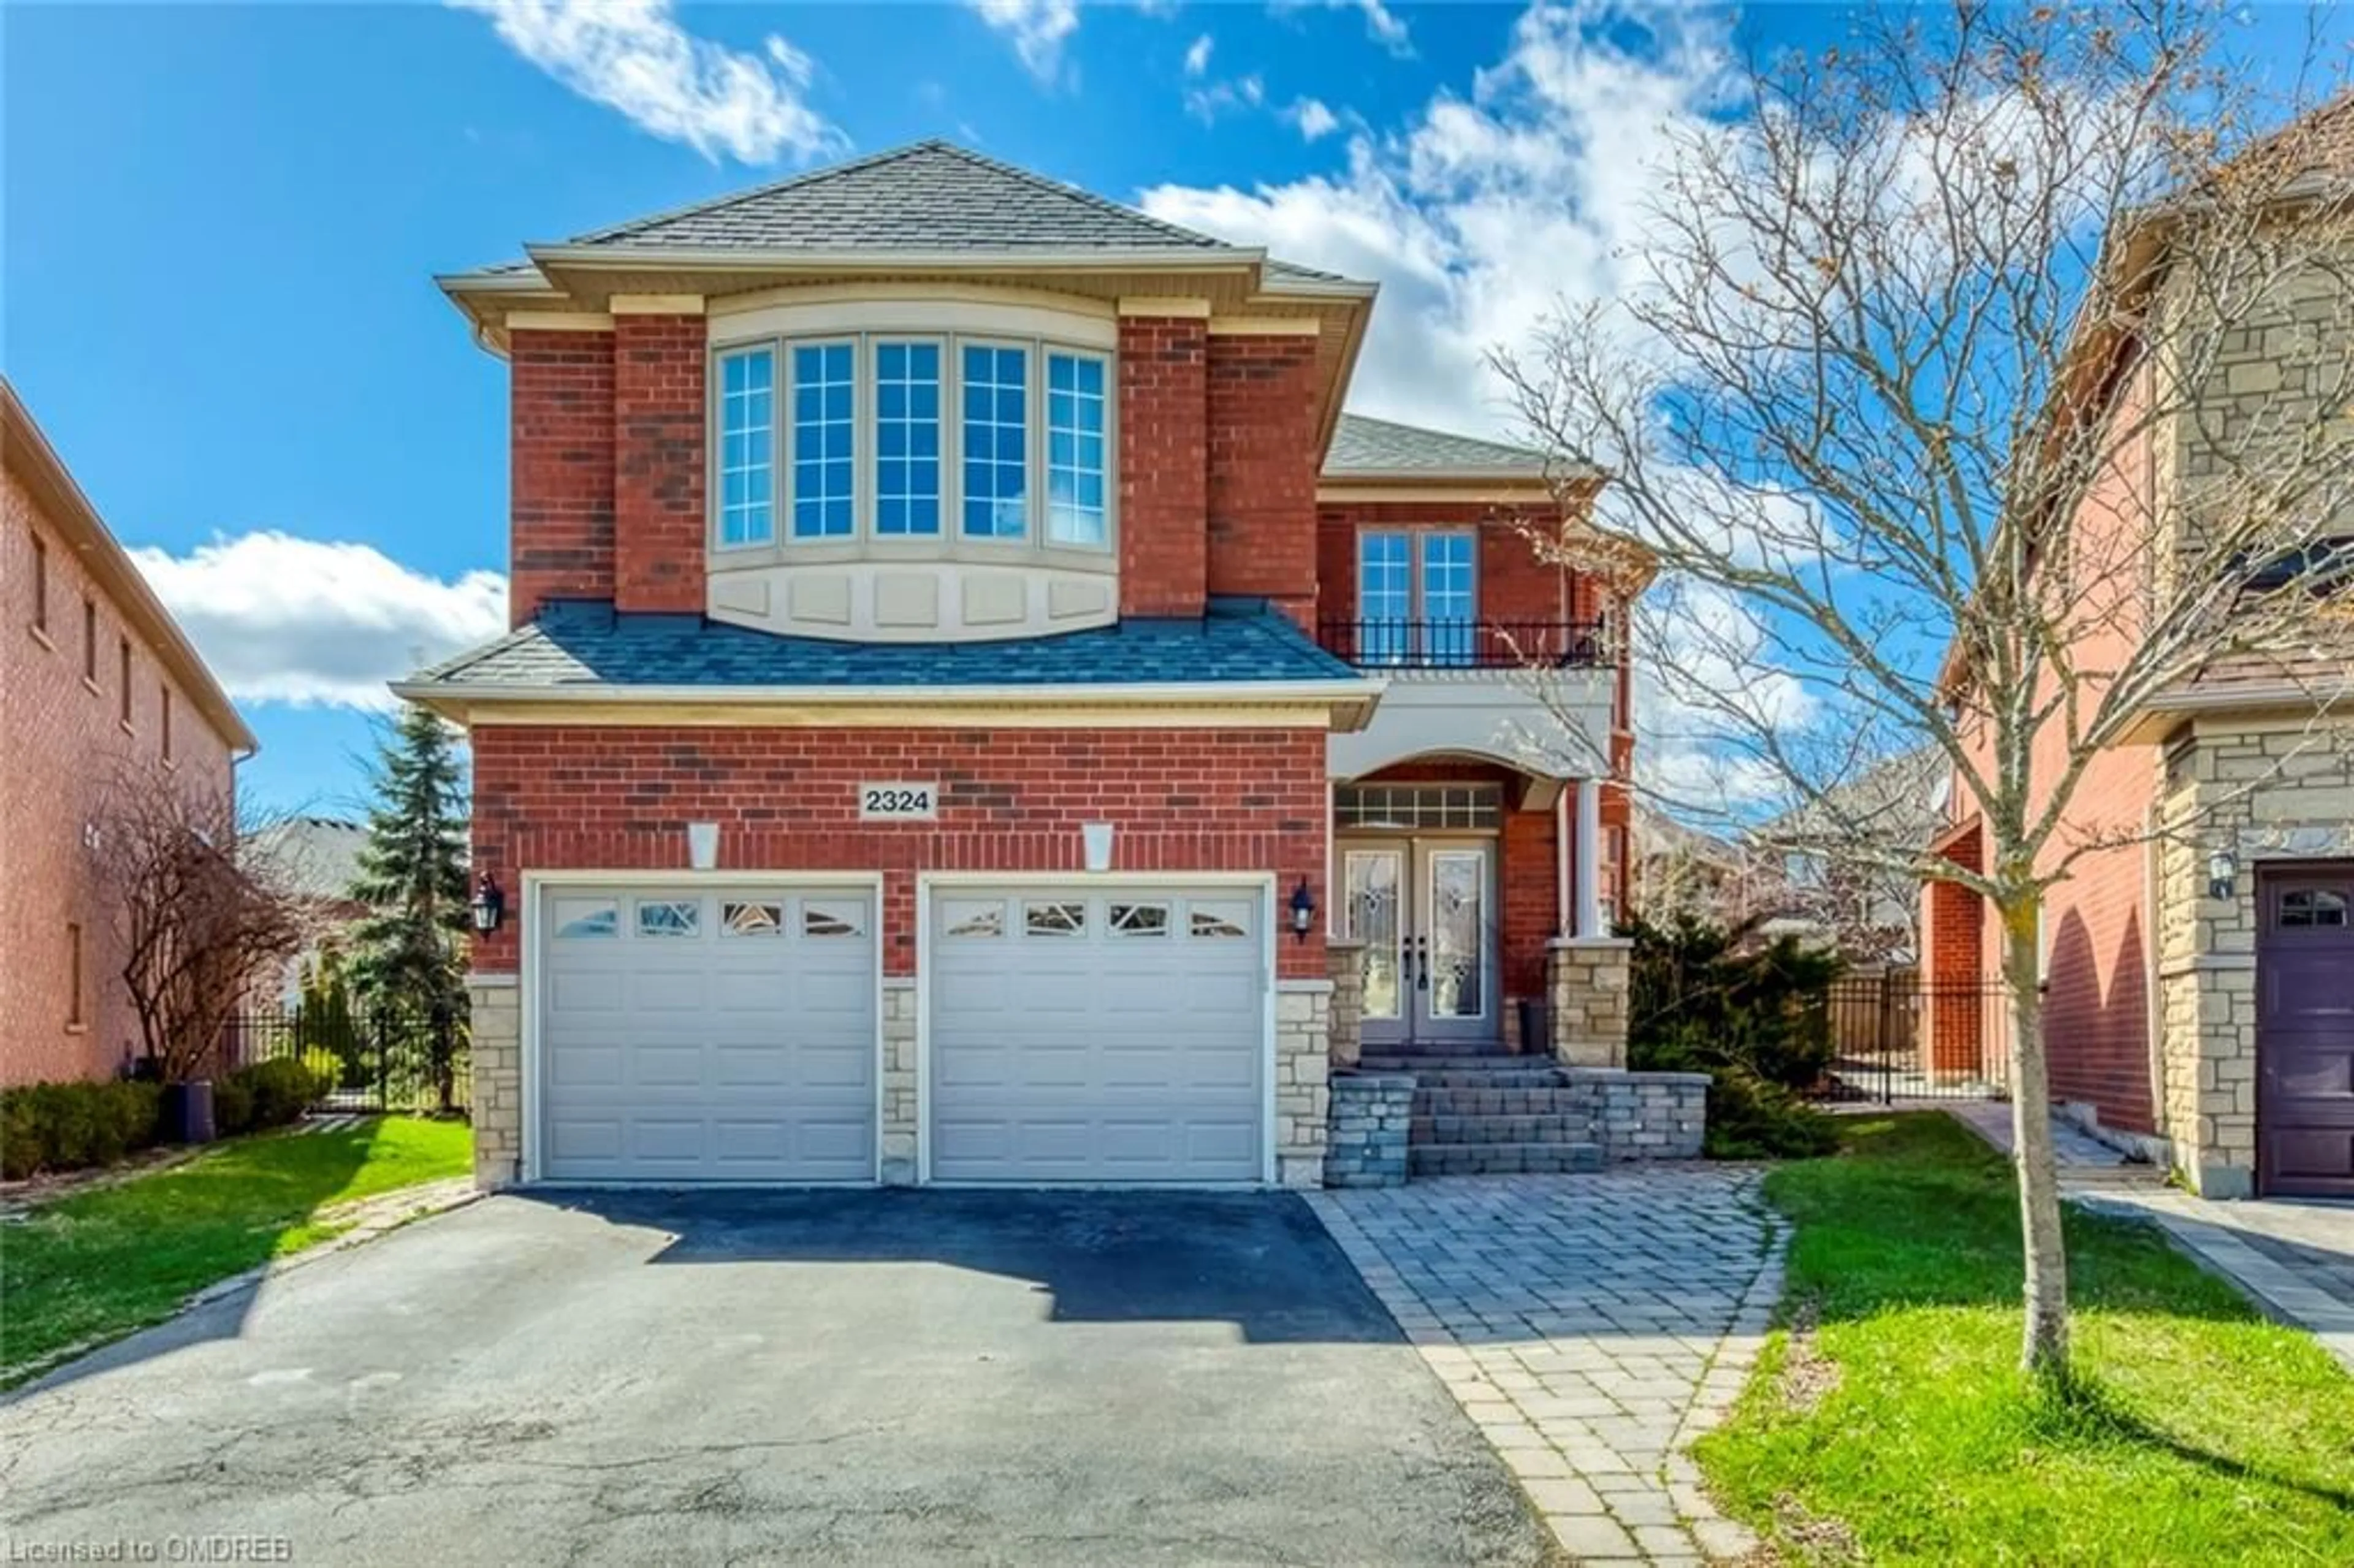 Home with brick exterior material for 2324 Hertfordshire Way, Oakville Ontario L6H 7M5